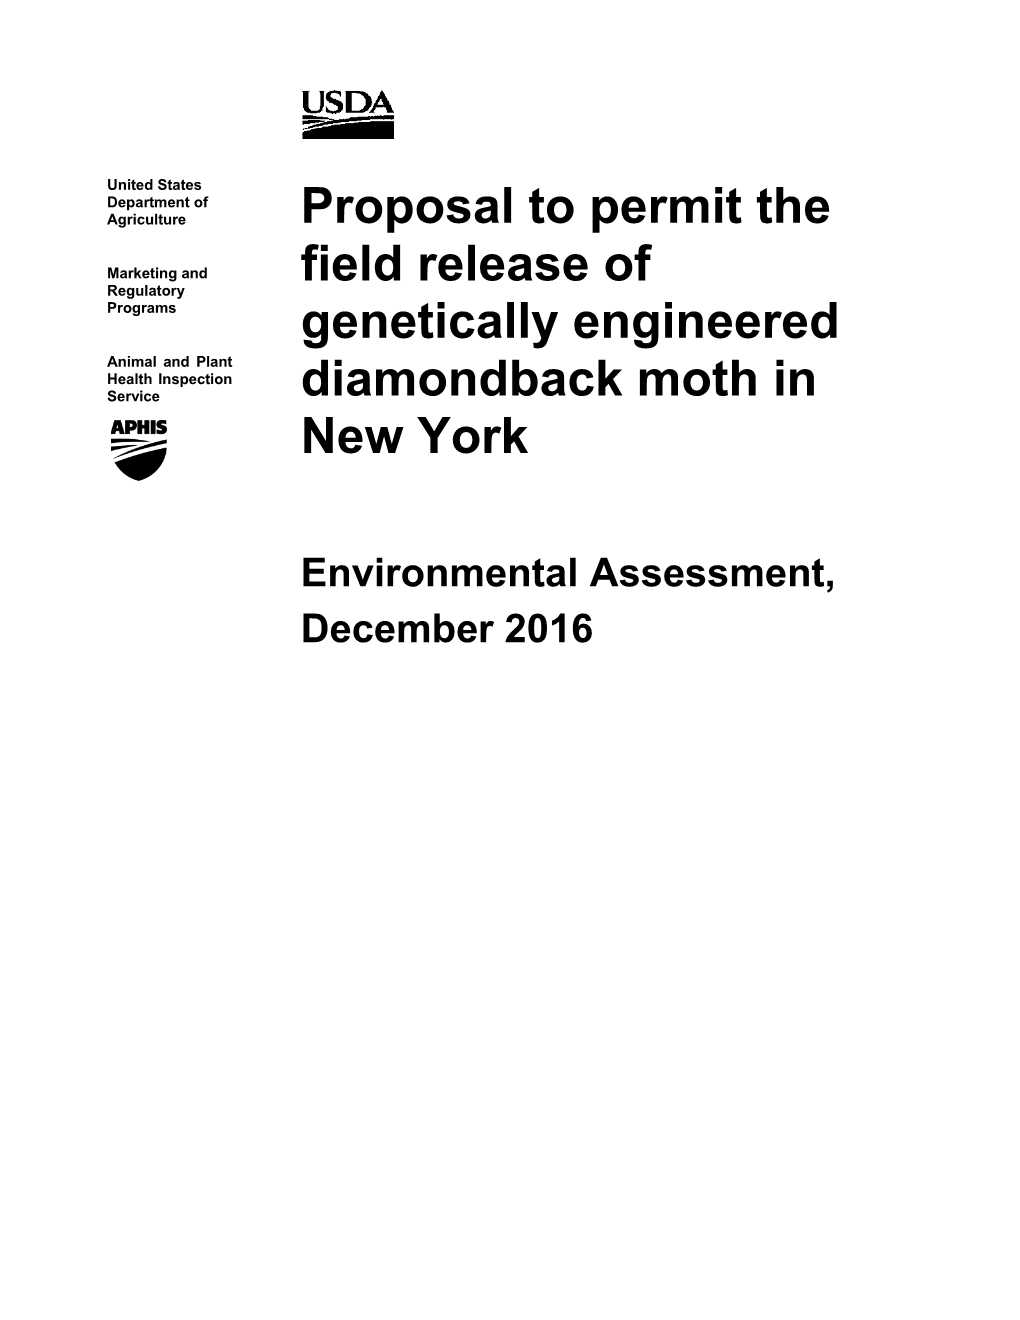 Proposal to Permit the Field Release of Genetically Engineered Diamondback Moth in New York